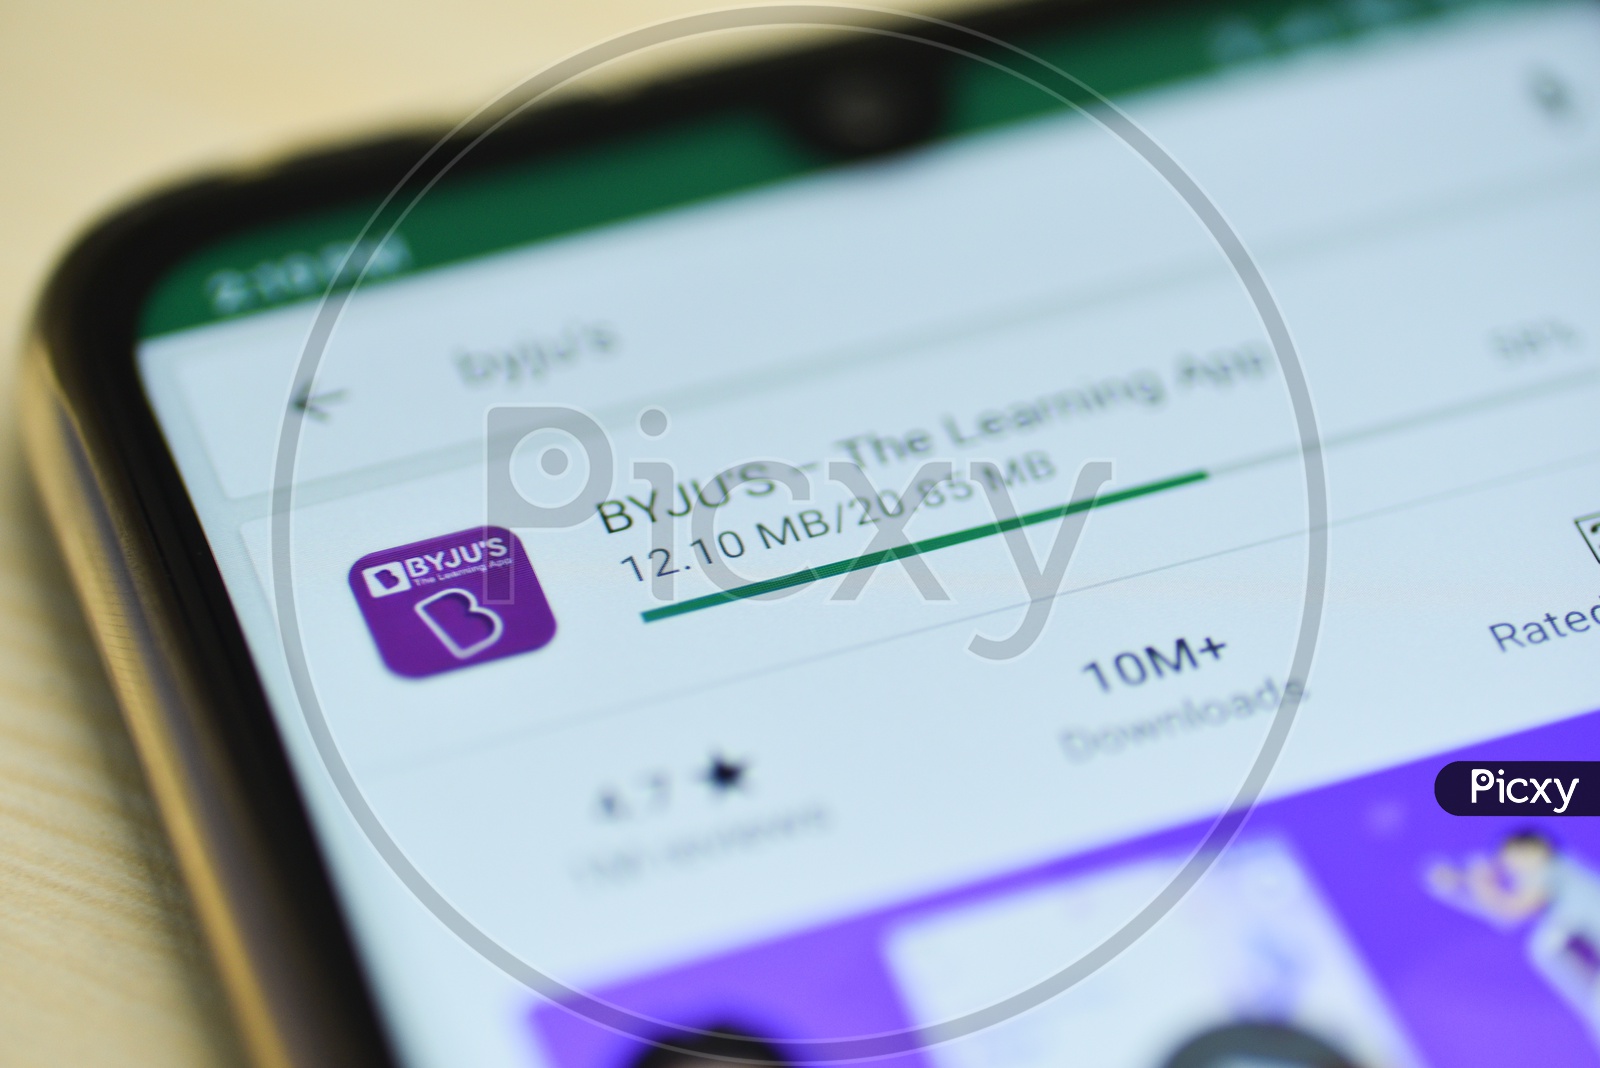 BYJU's Or BYJUS The Learning App or Application Being Installing  in  Mobile  or Smartphone  Closeup